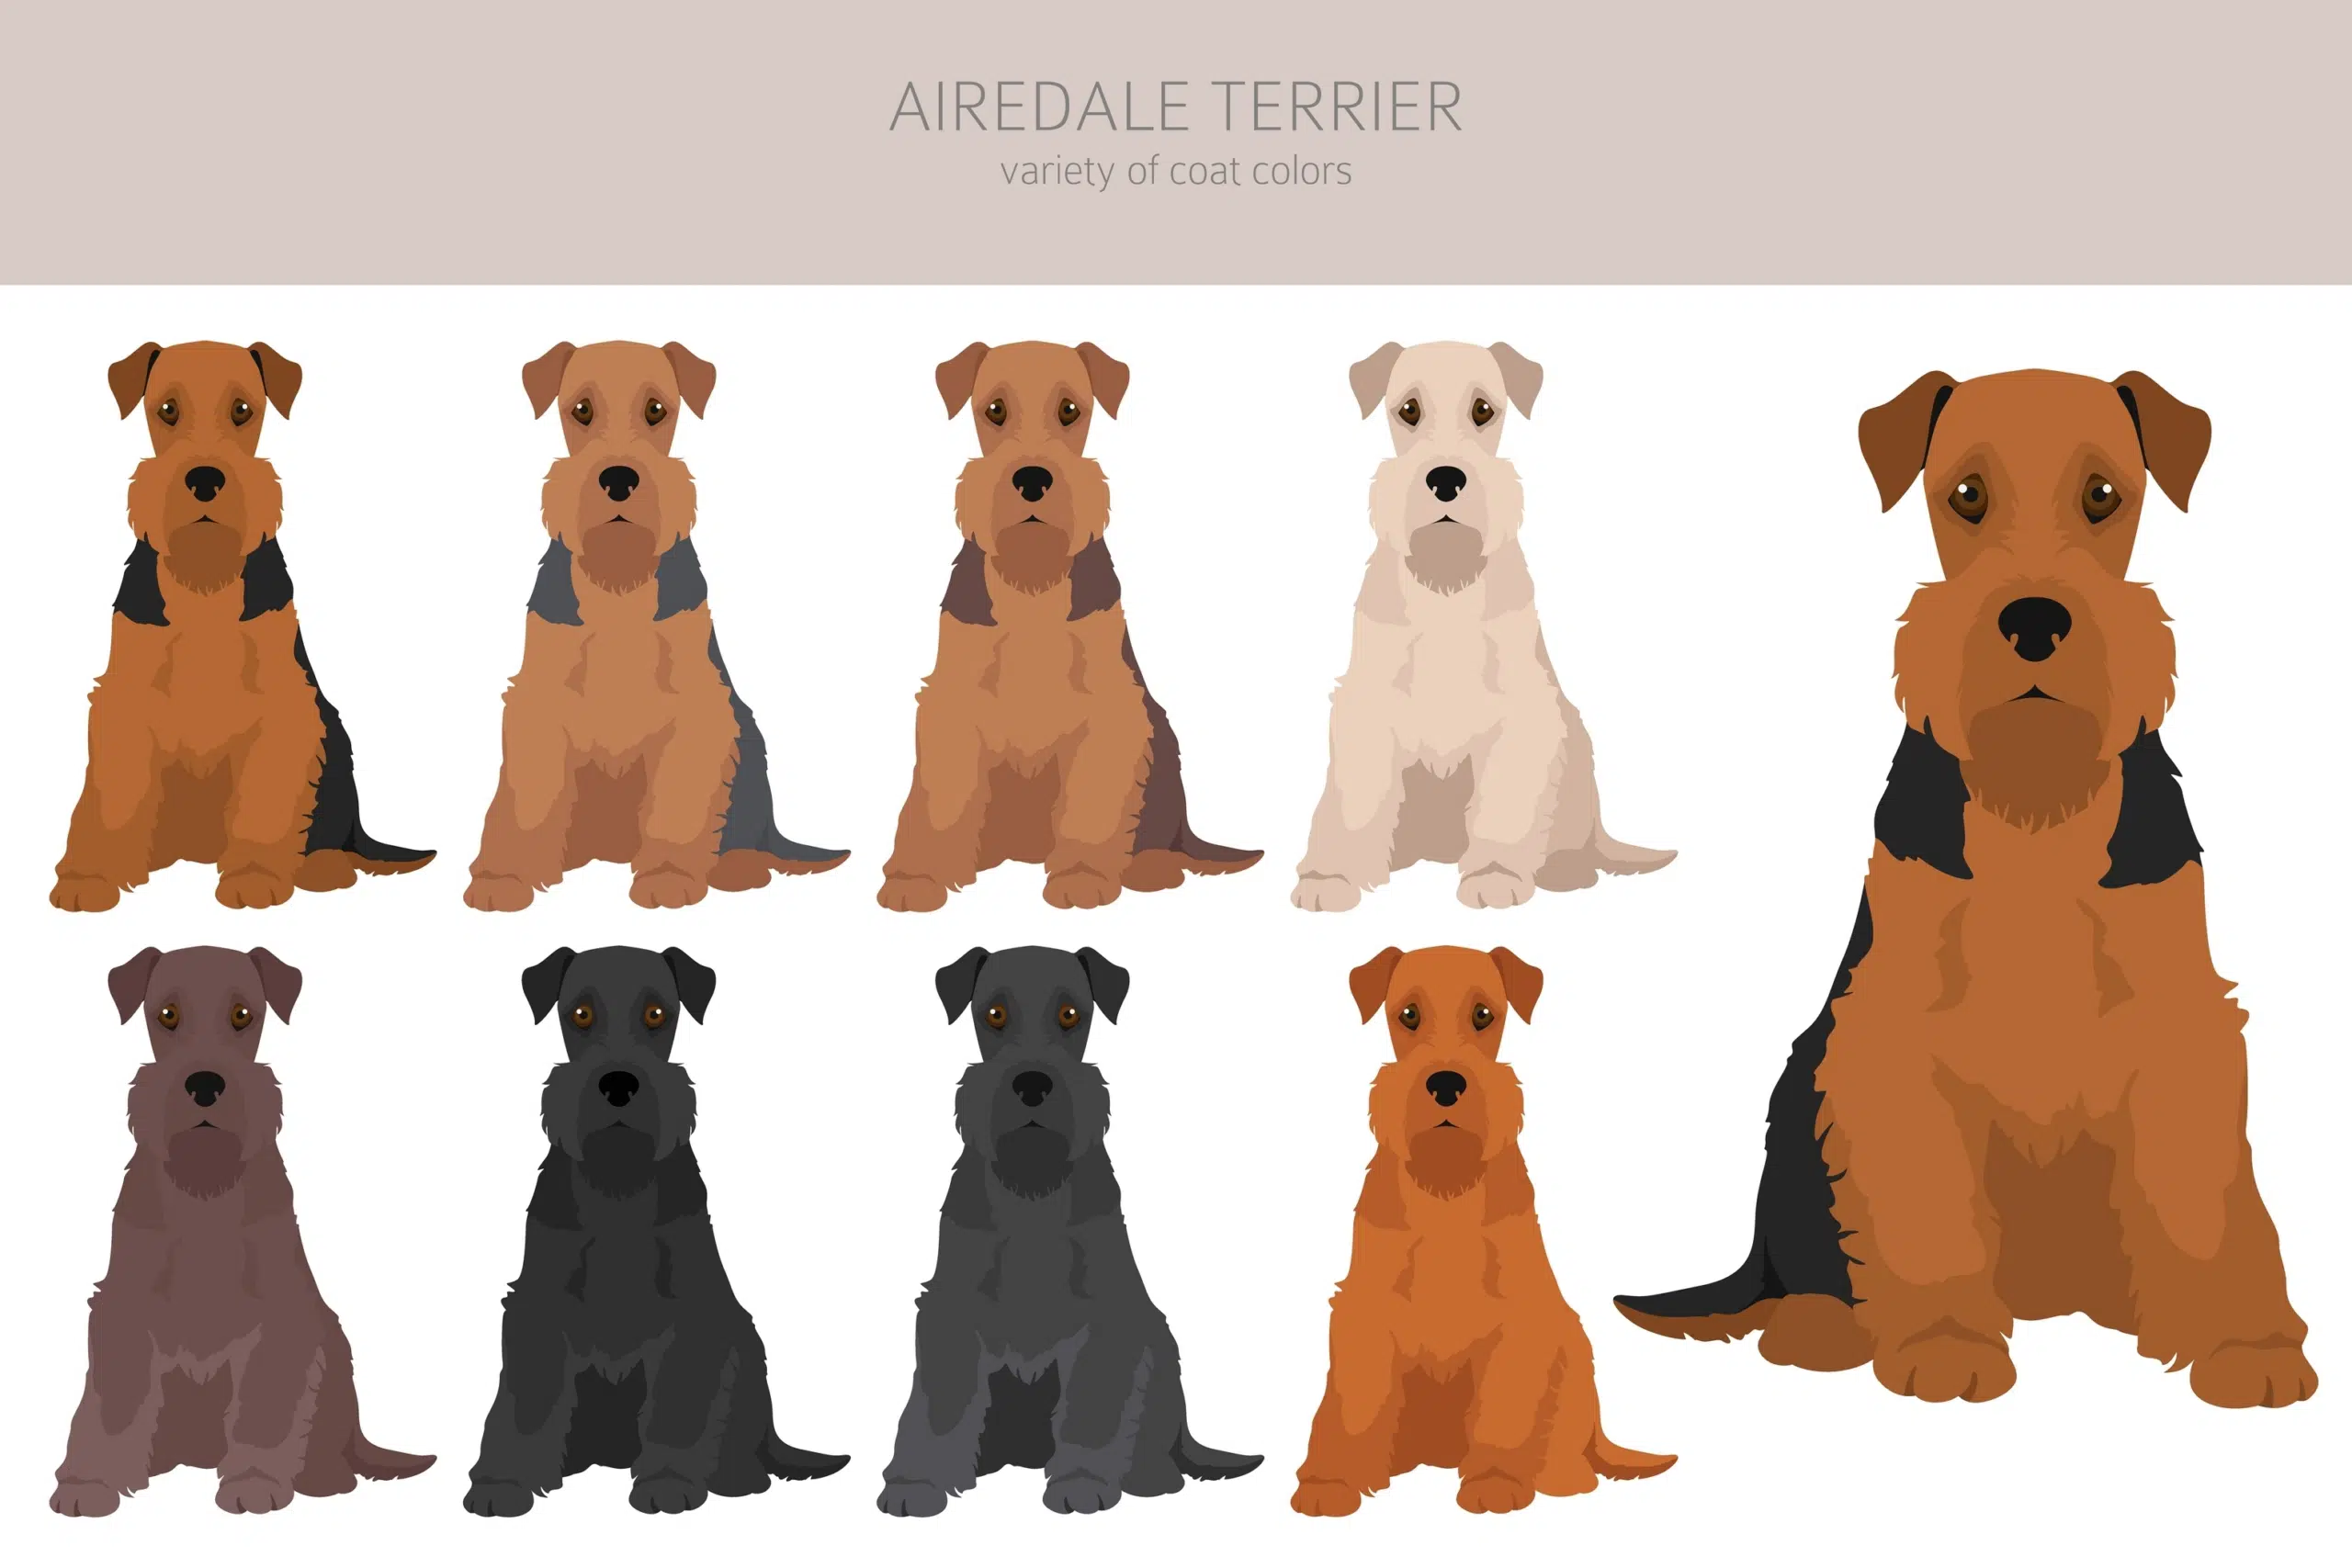 Coat Varieties of the Airedale